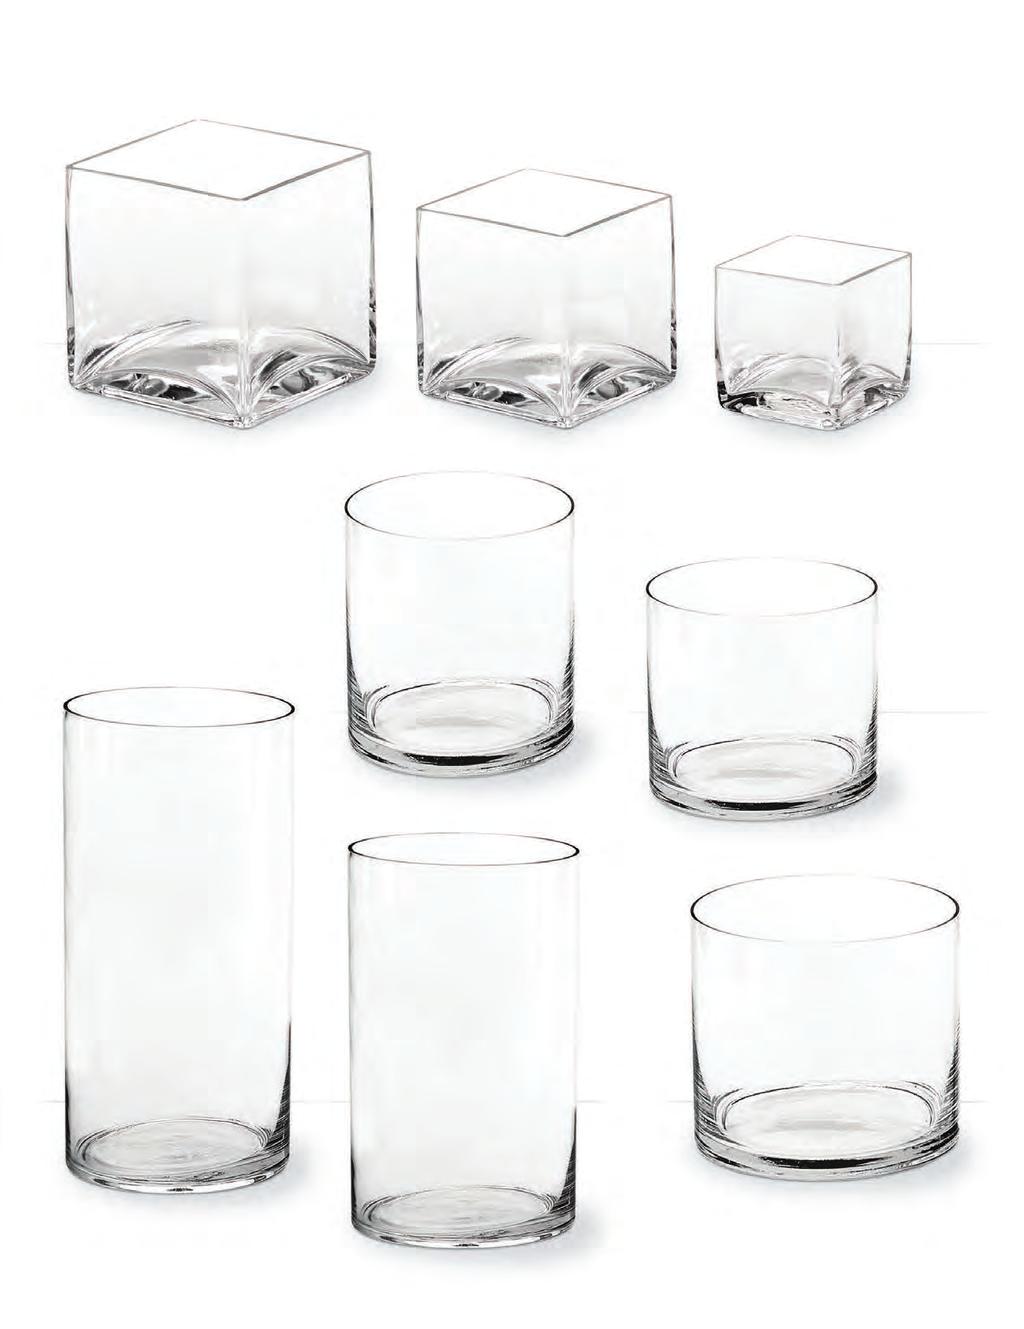 Hand Blown Glass Cubes and Cylinders HBQ666 6 x 6 x 6 6/$7.99 ea. HBQ555 5 x 5 x 5 12/$4.99 ea. HBQ444 4 x 4 x 4 12/$2.99 ea. HBC56 5 x 6 12/$4.49 ea. HBC55 5 x 5 12/$3.